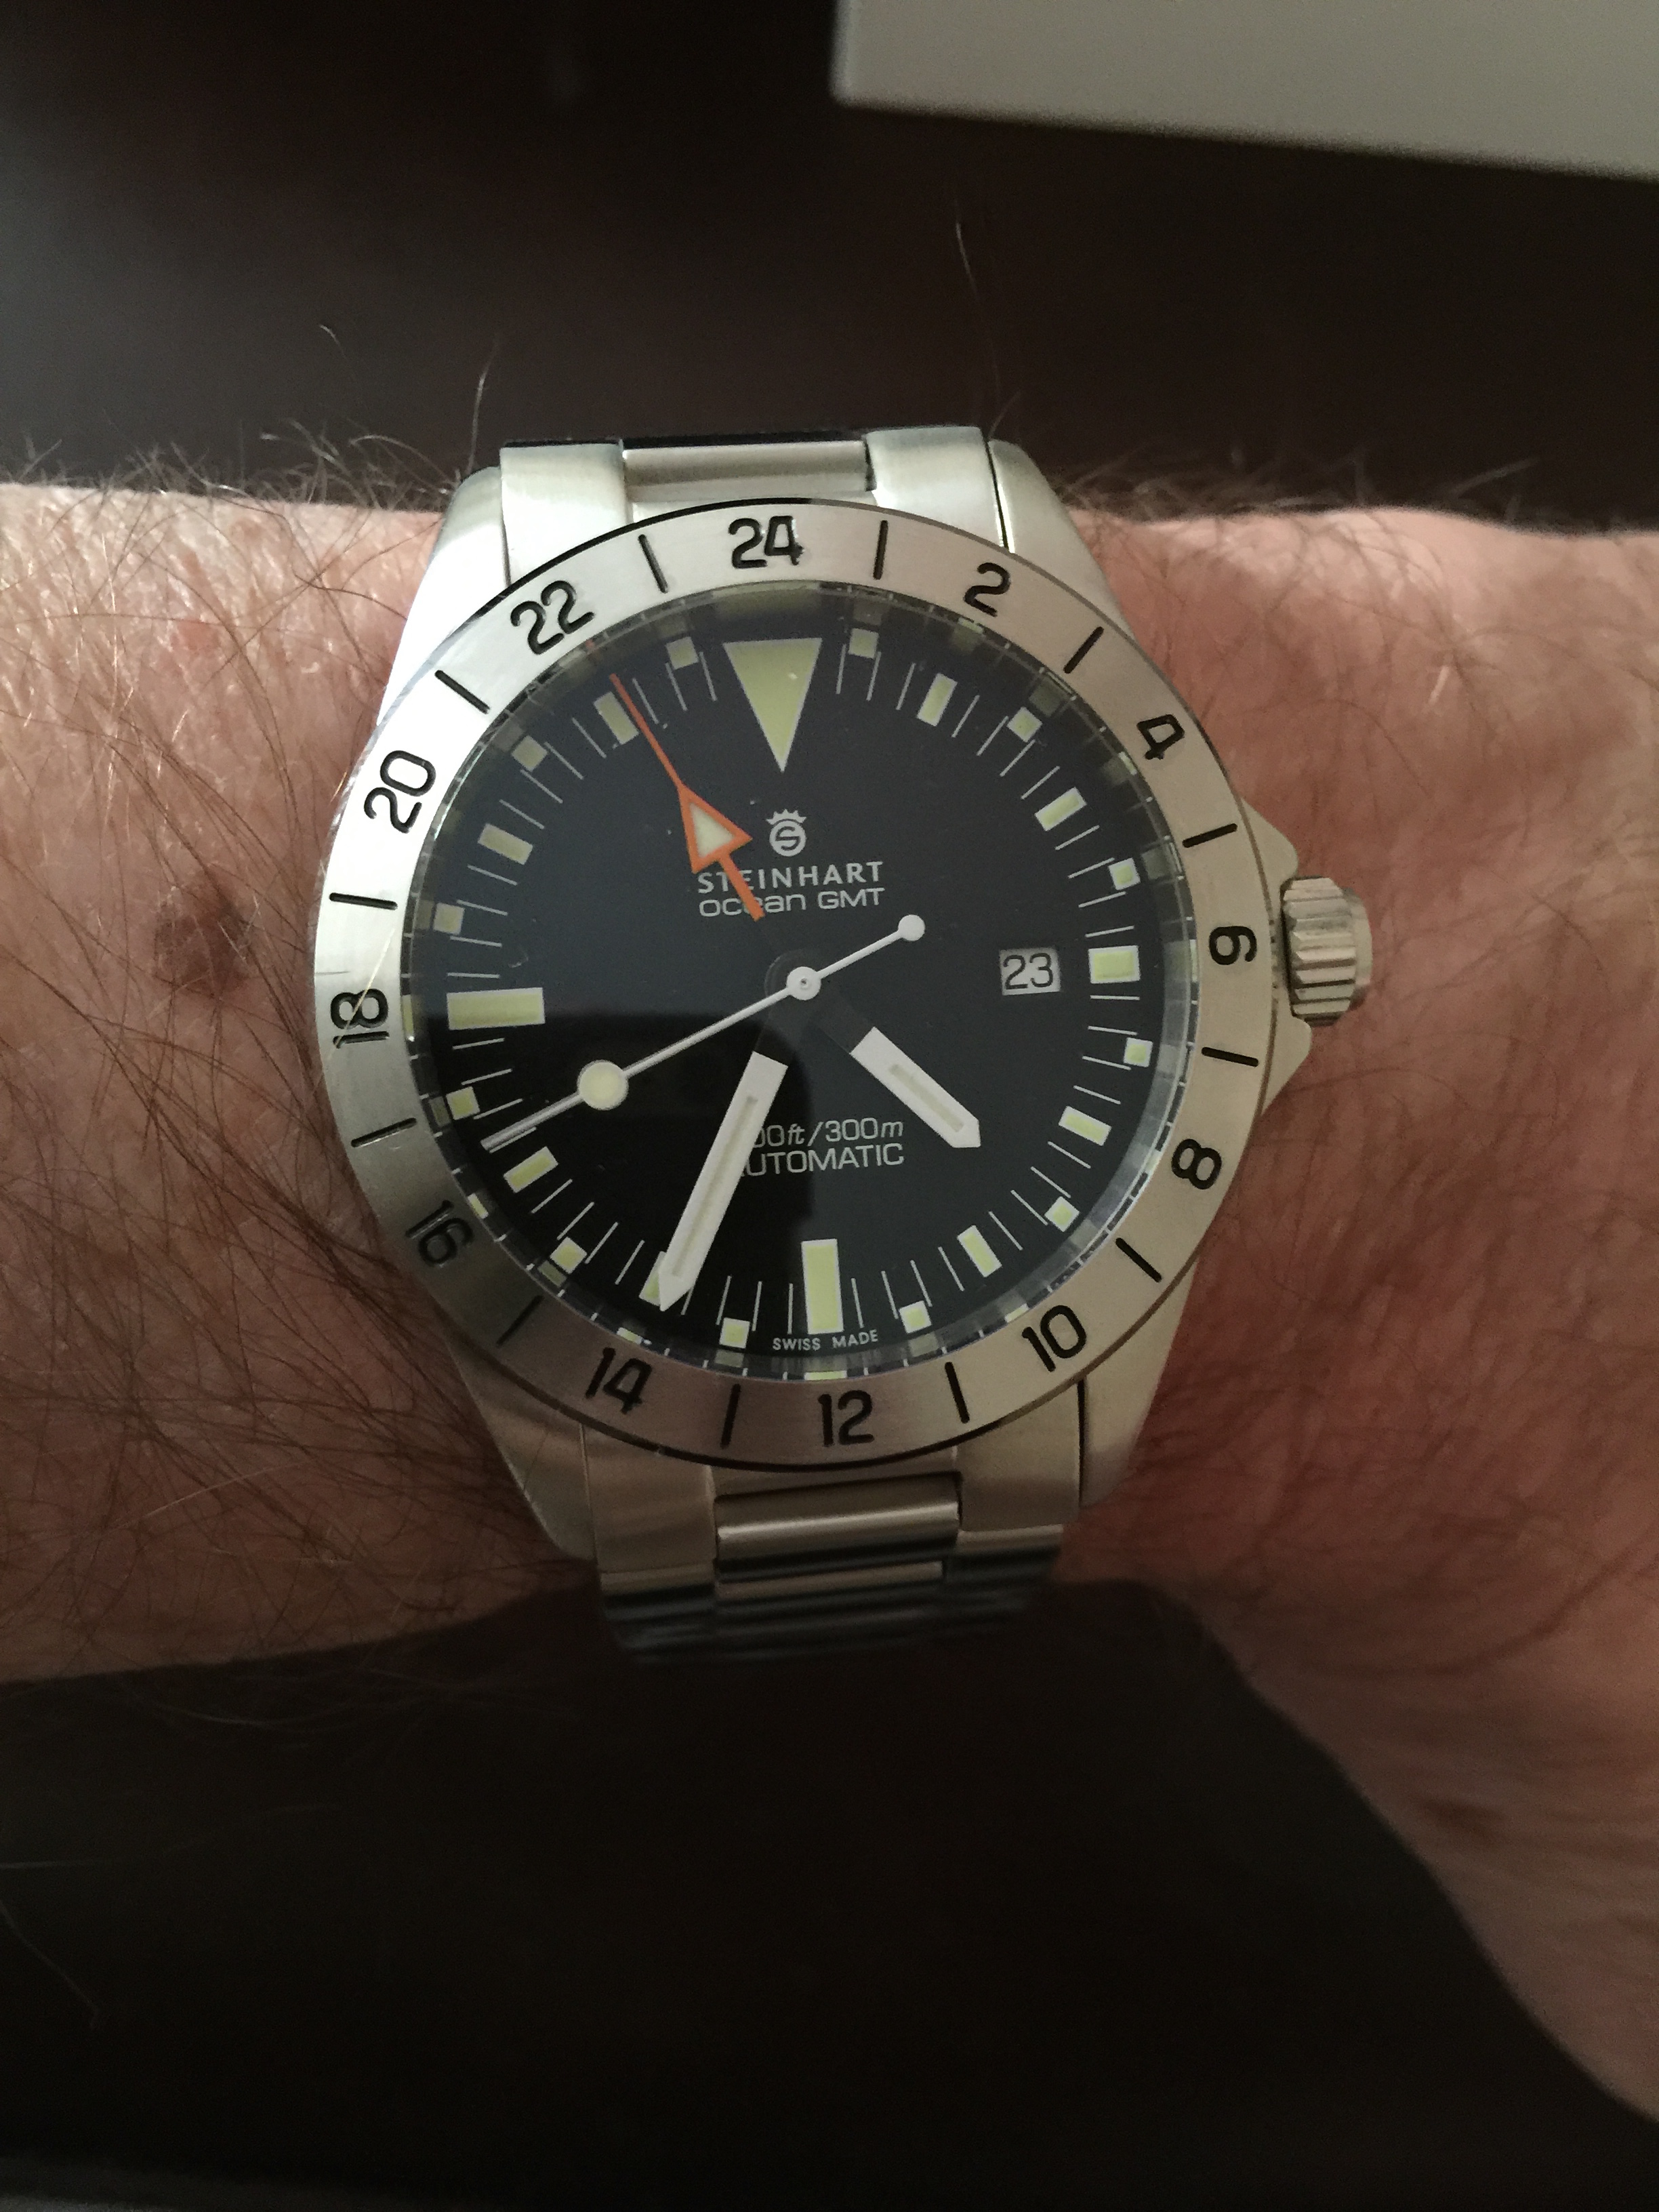 Steinhart Ocean Vintage GMT. This is an homage to the Rolex 1655, the so-called Steve McQueen Explorer II model. It's a lovely watch, if rather large. 42mm at 190g, which makes it a bit heavy. Very well constructed and a bargain at 412/490 EUR